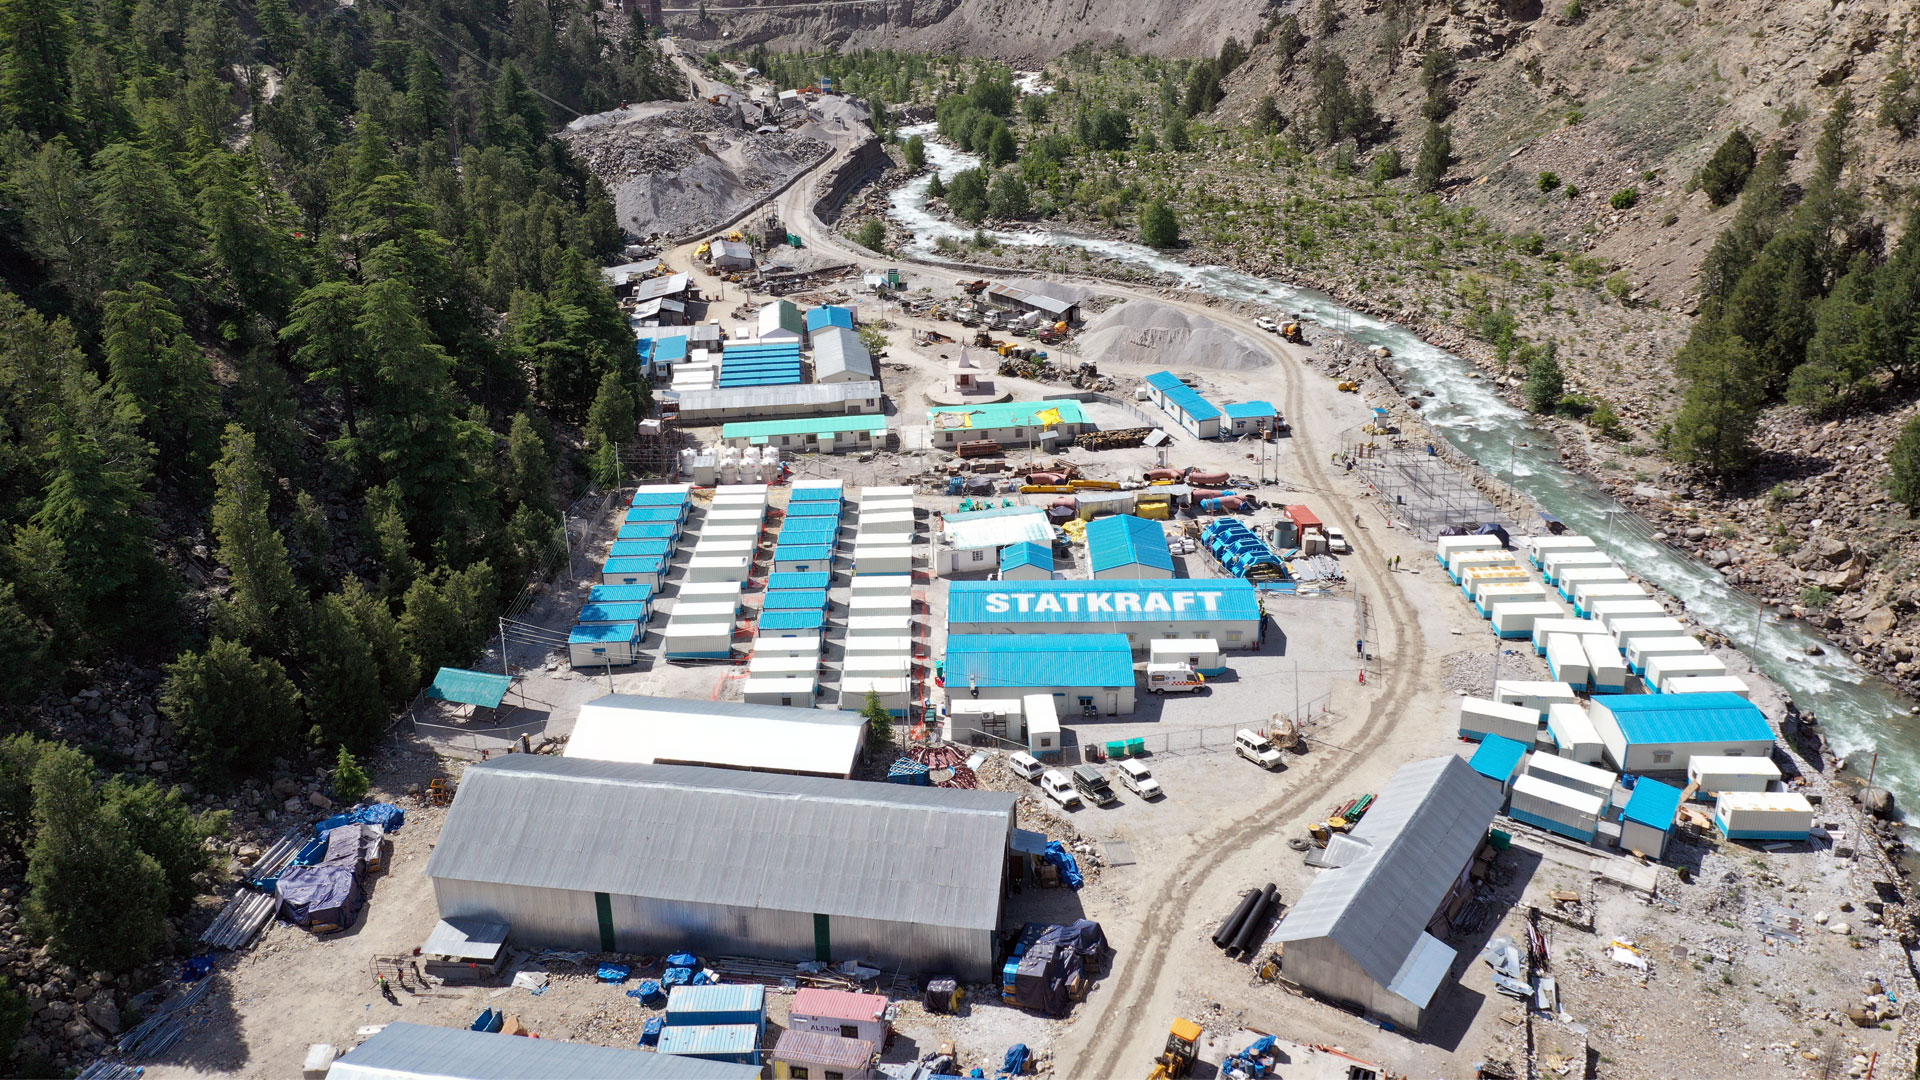 PROGRESS REPORT FROM TIDONG – A HYDRO POWER PLANT UNDER CONSTRUCTION IN HIMACHAL PRADESH